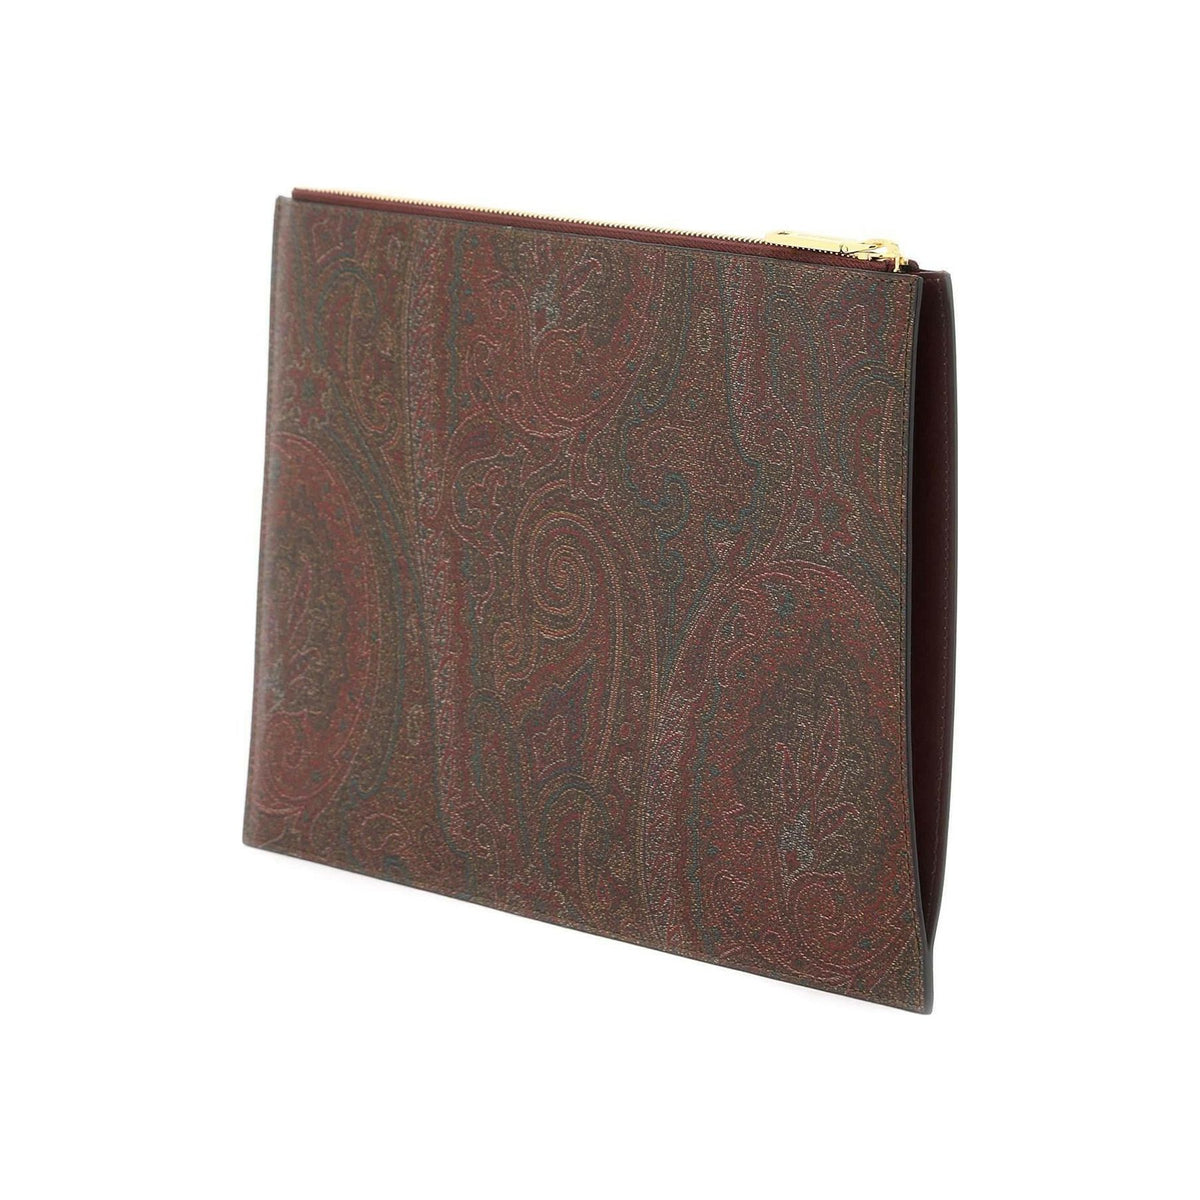 ETRO - Paisley Coated Canvas Embroidered Pouch - JOHN JULIA